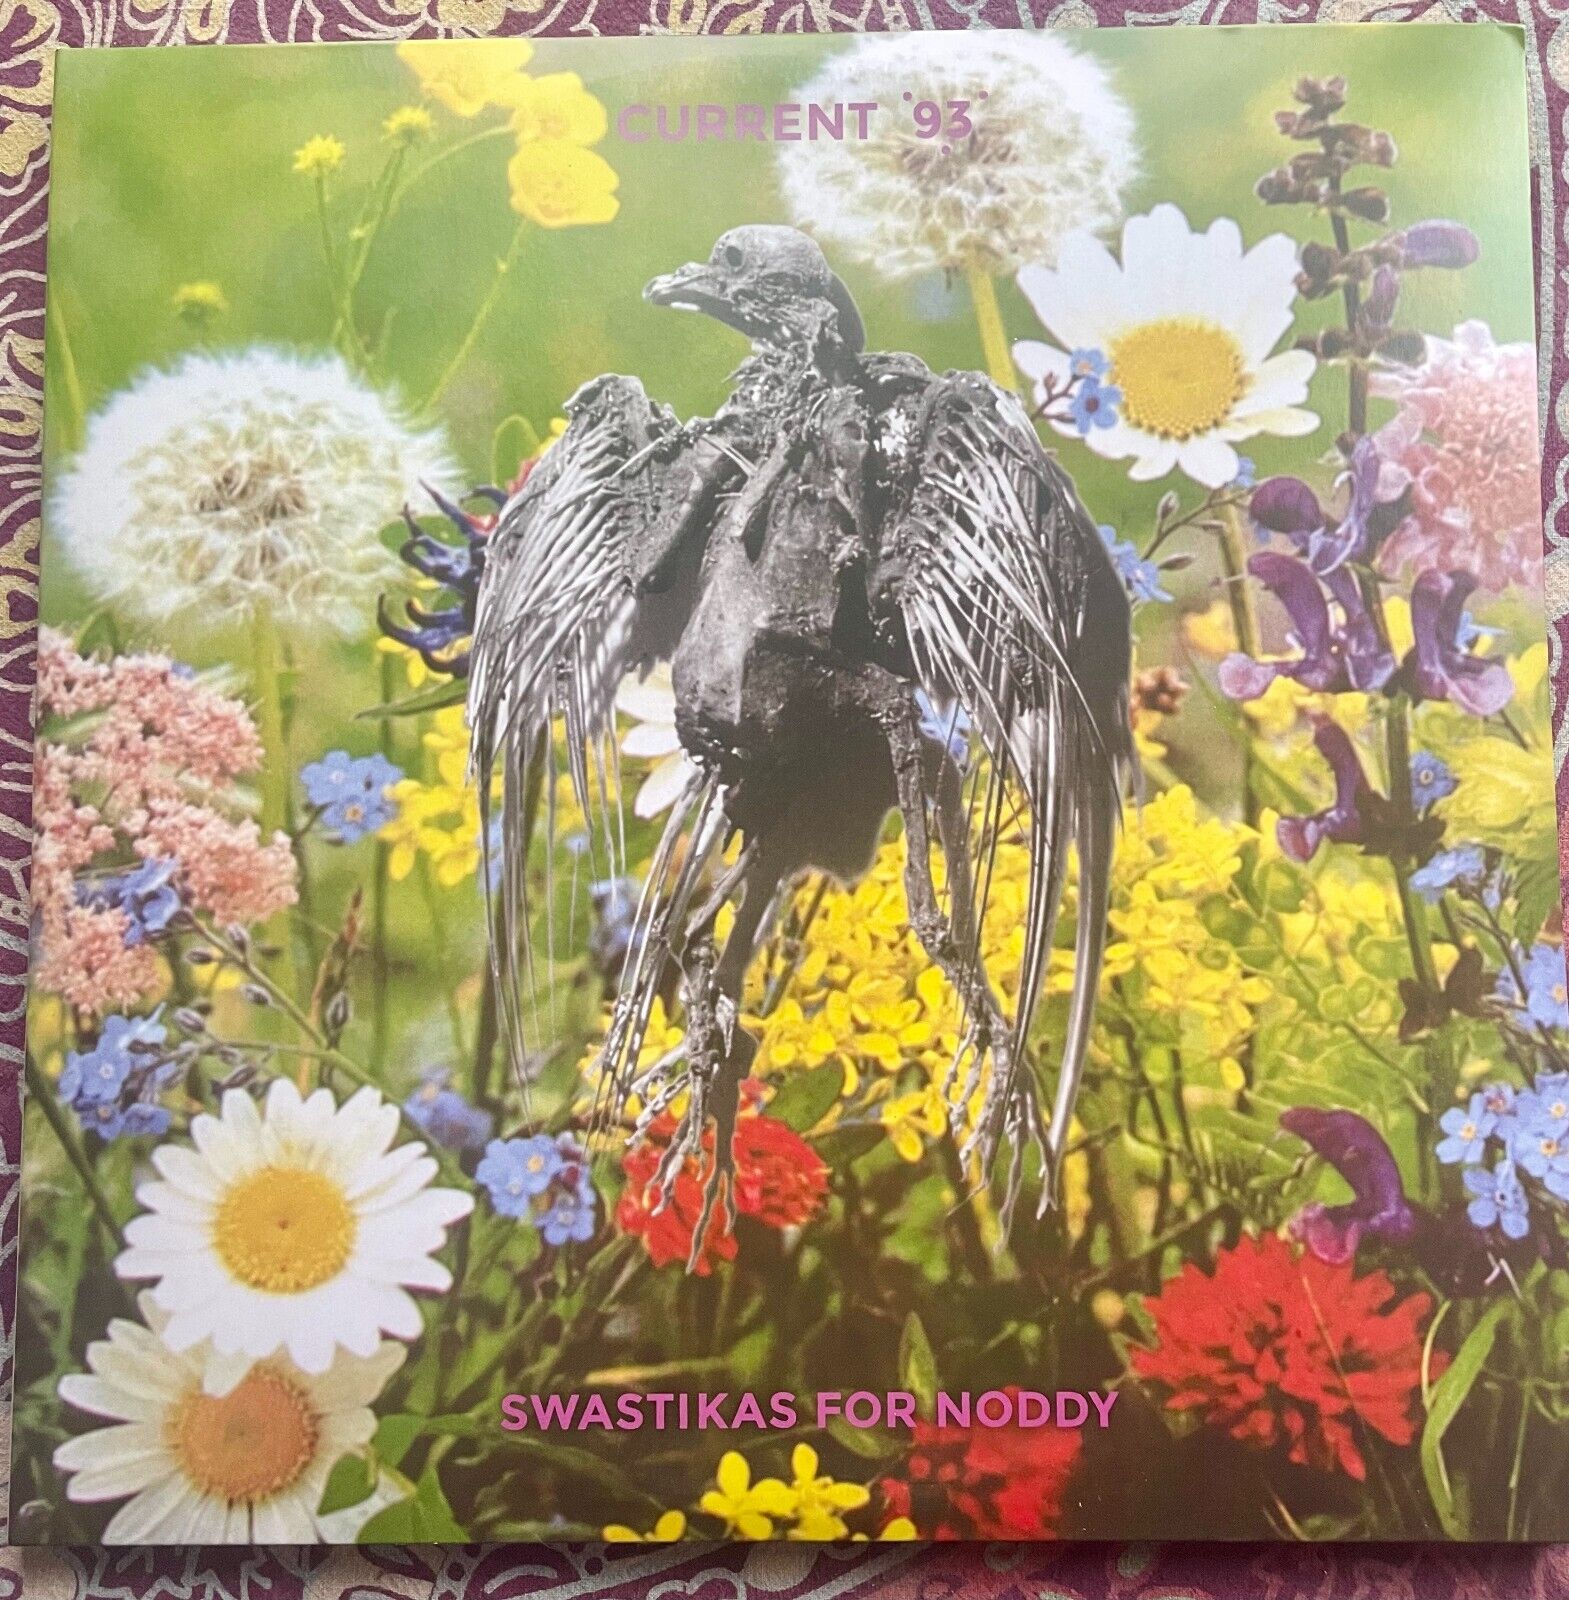 Current 93 - Swastikas for Noddy/Crooked Crosses  Double LP neofolk masterpiece